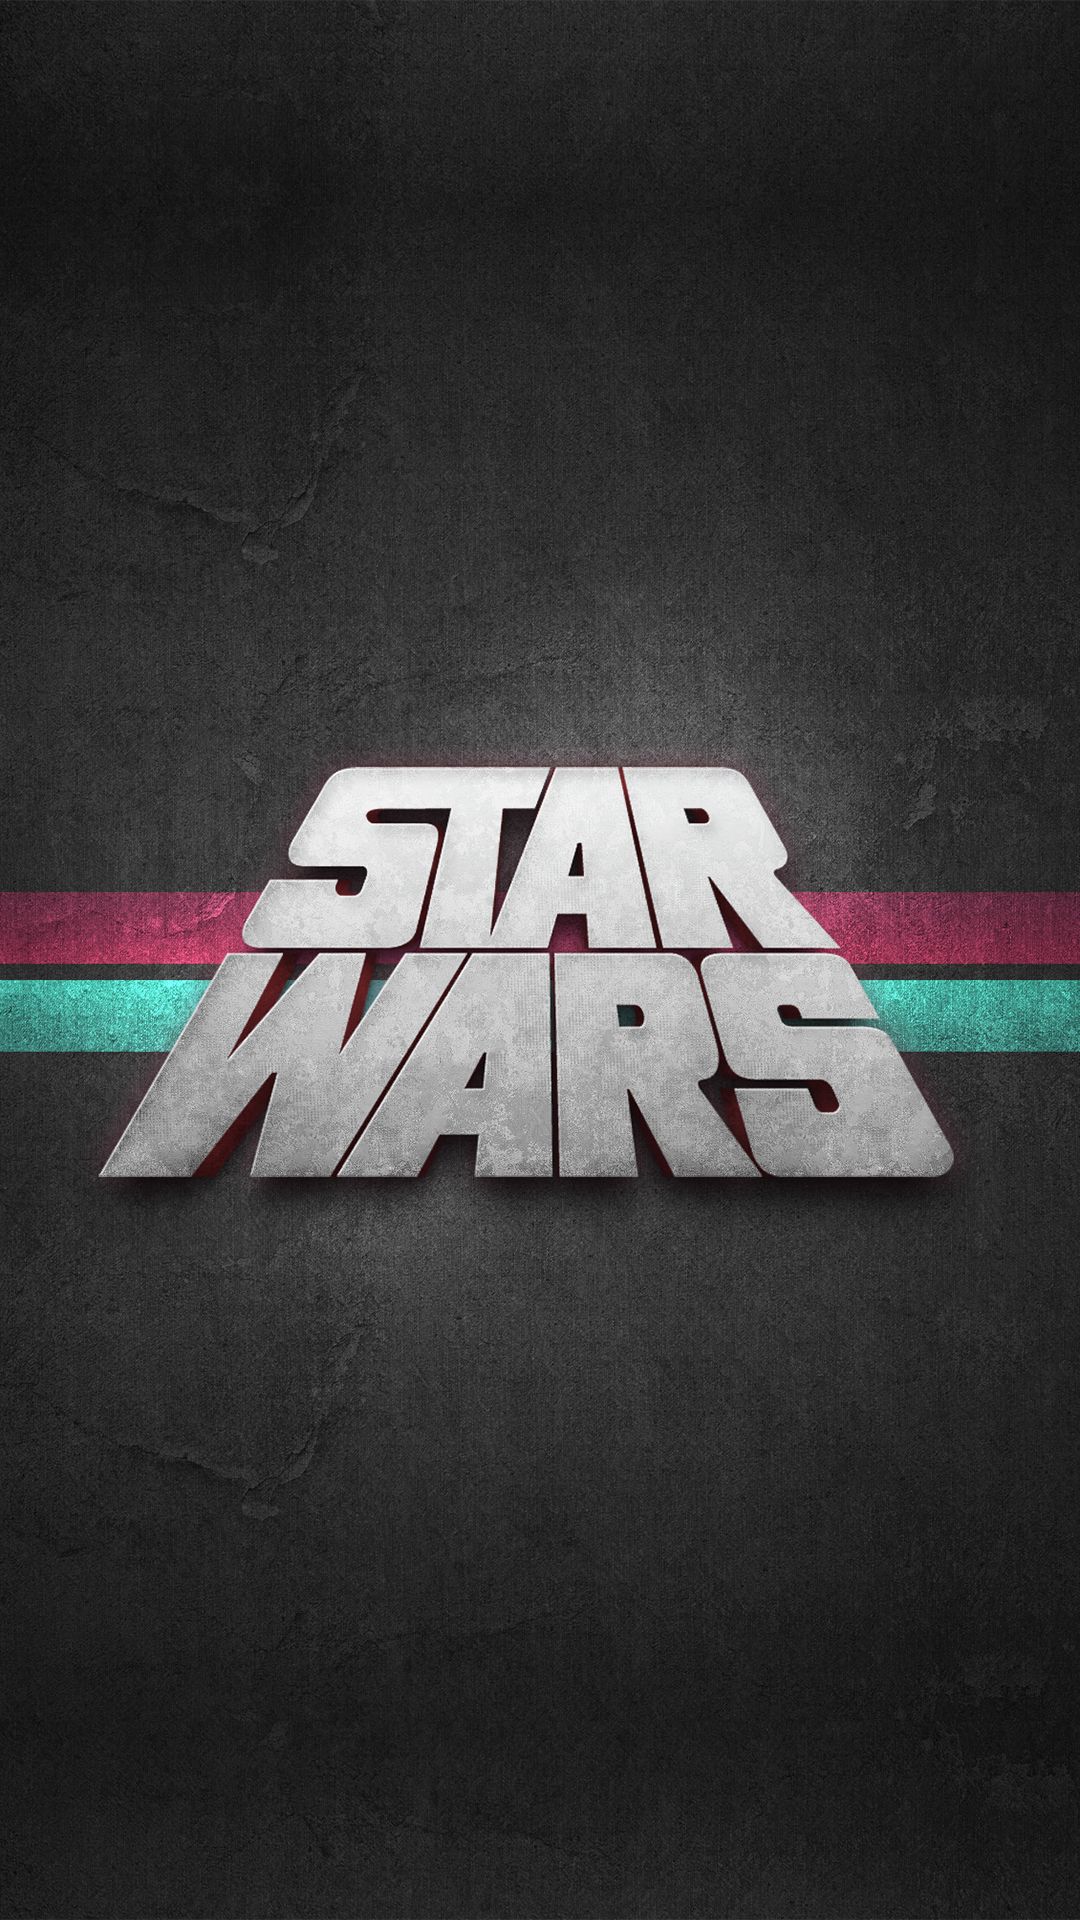 Star Wars Wallpapers For Android Group (64+)